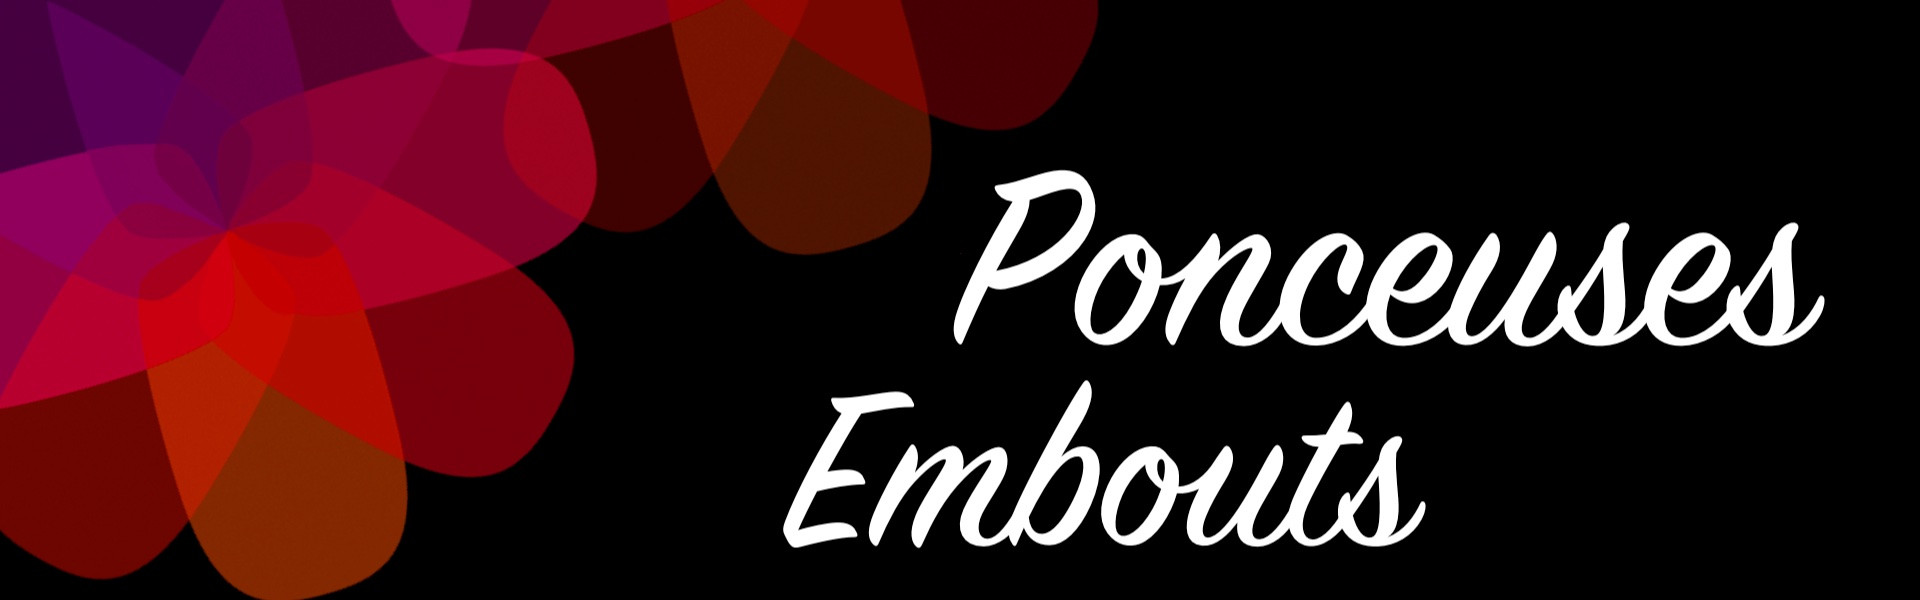 Embouts Ponceuses